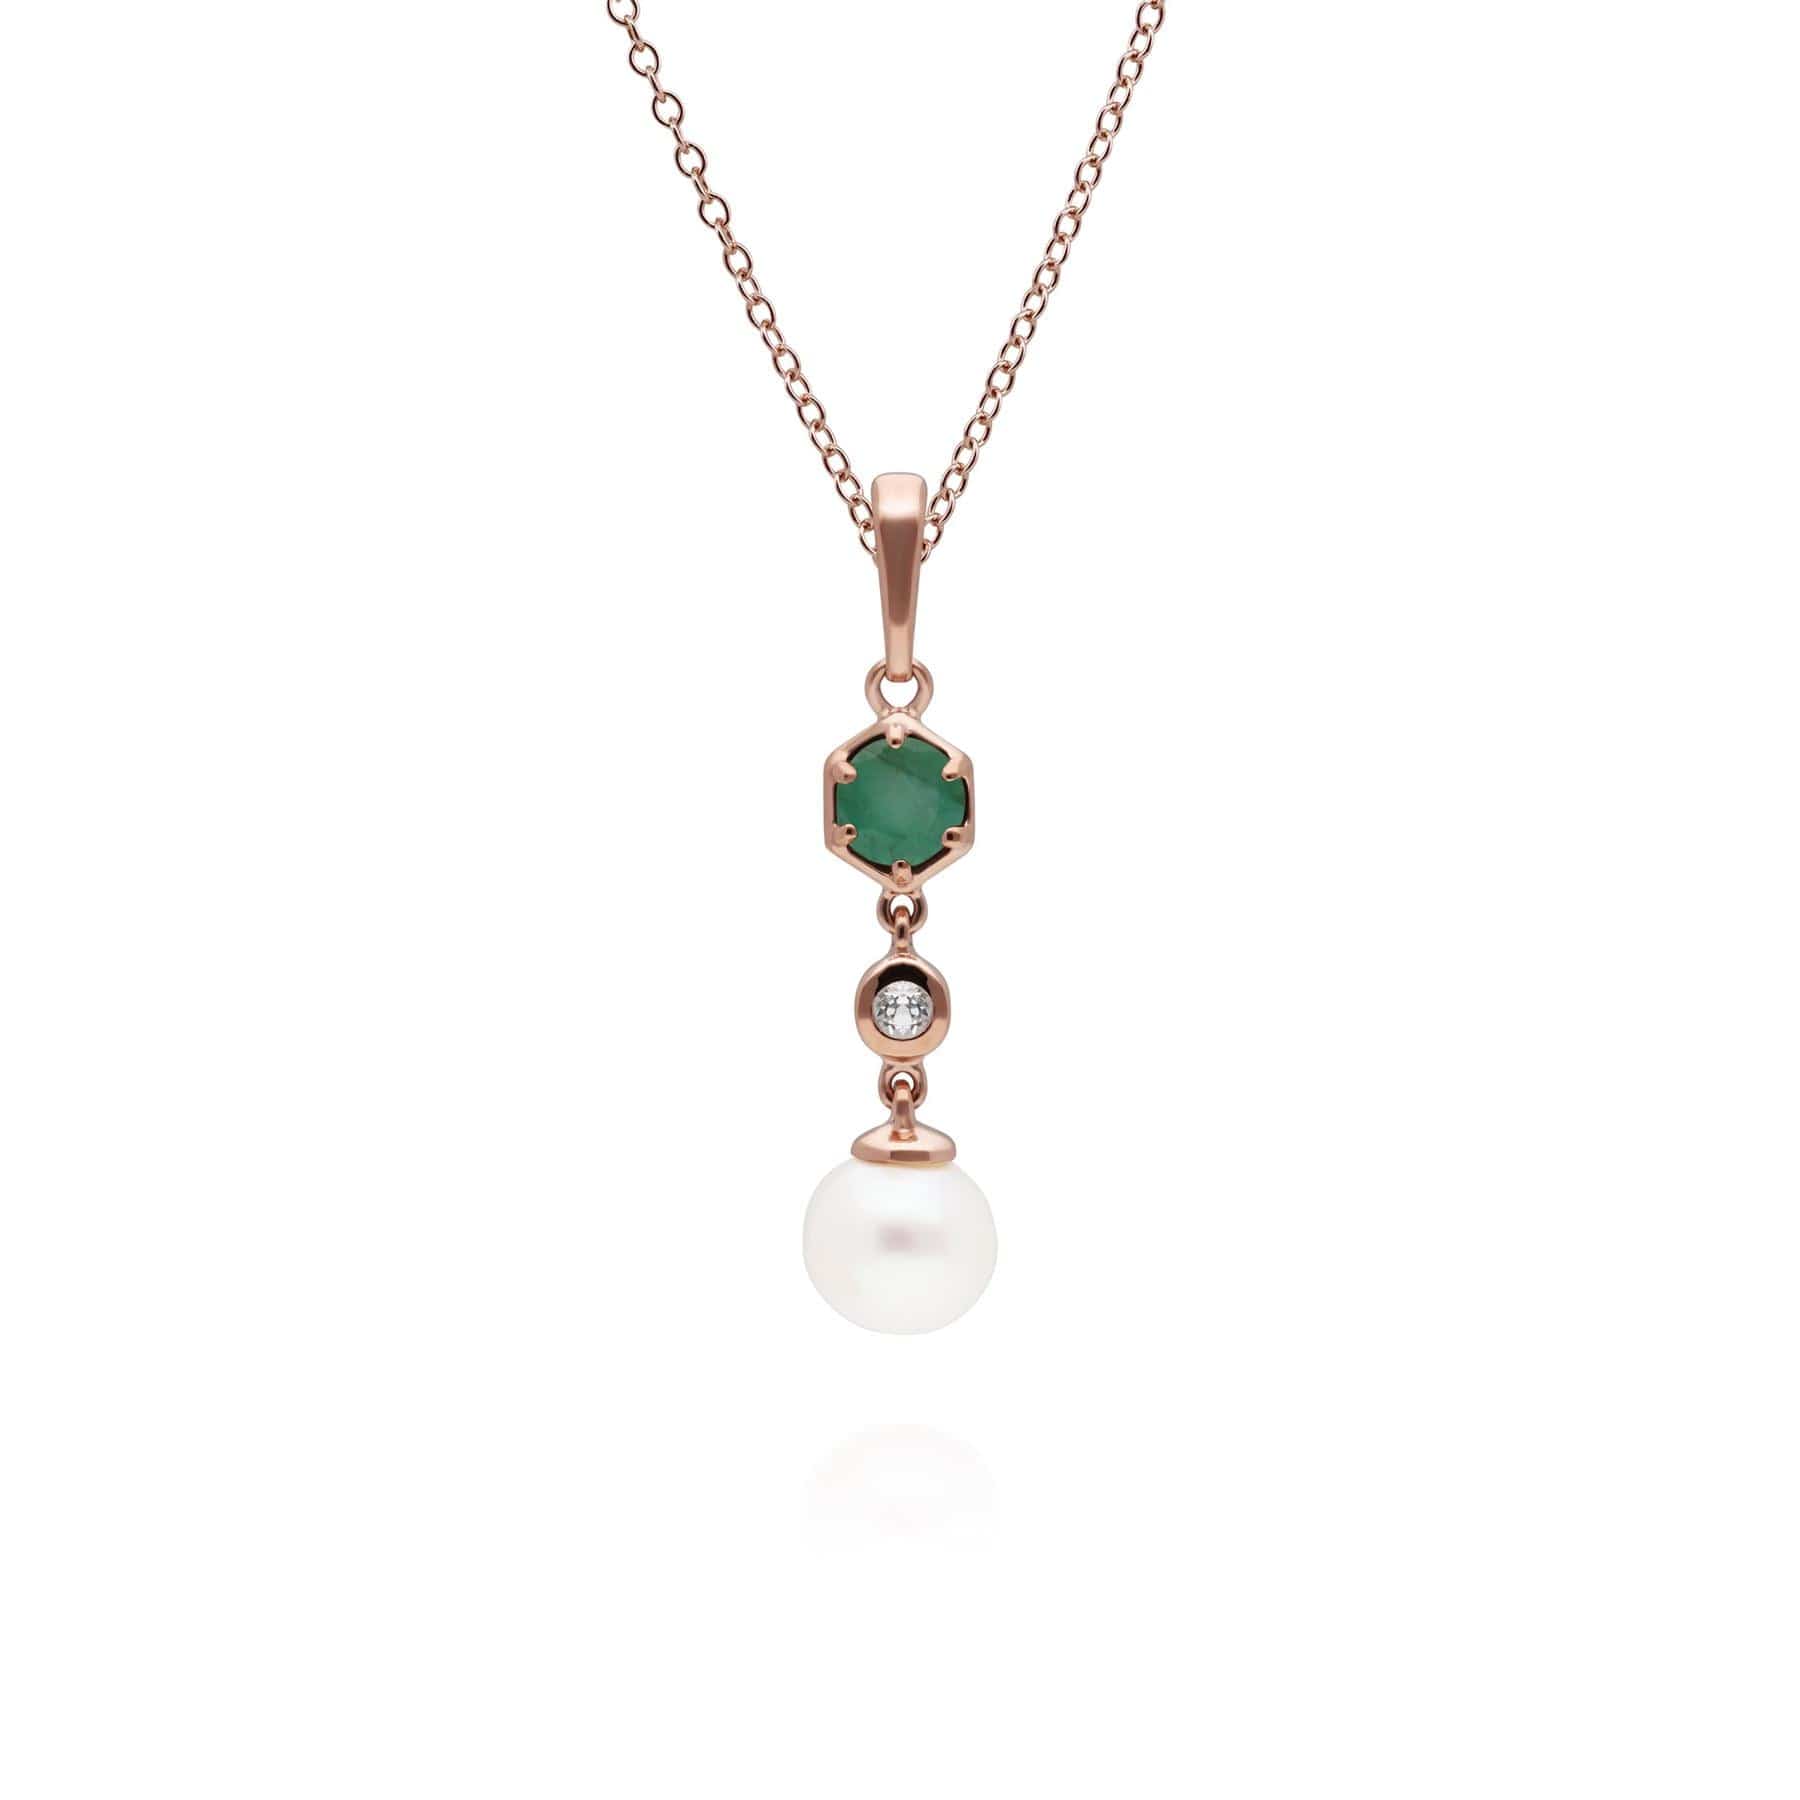 Photos - Pendant / Choker Necklace Modern Pearl, Emerald & Topaz Drop Pendant in Rose Gold Plated Silver